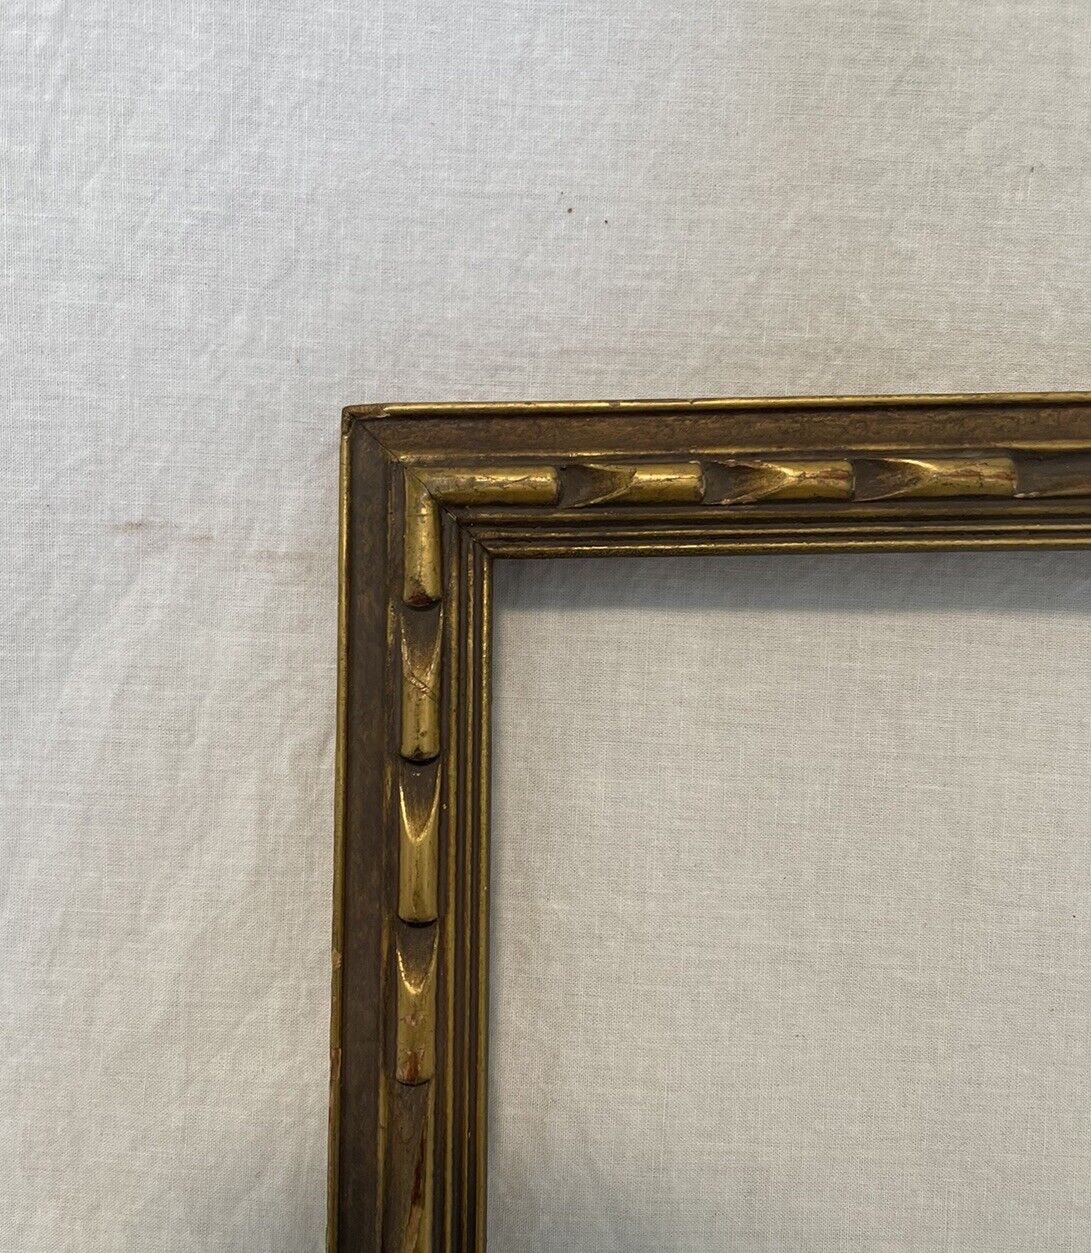 ANTIQUE FITs 12”x16” TAOS SCHOOL CARVED GOLD GILT ARTS & CRAFTS PICTURE FRAME